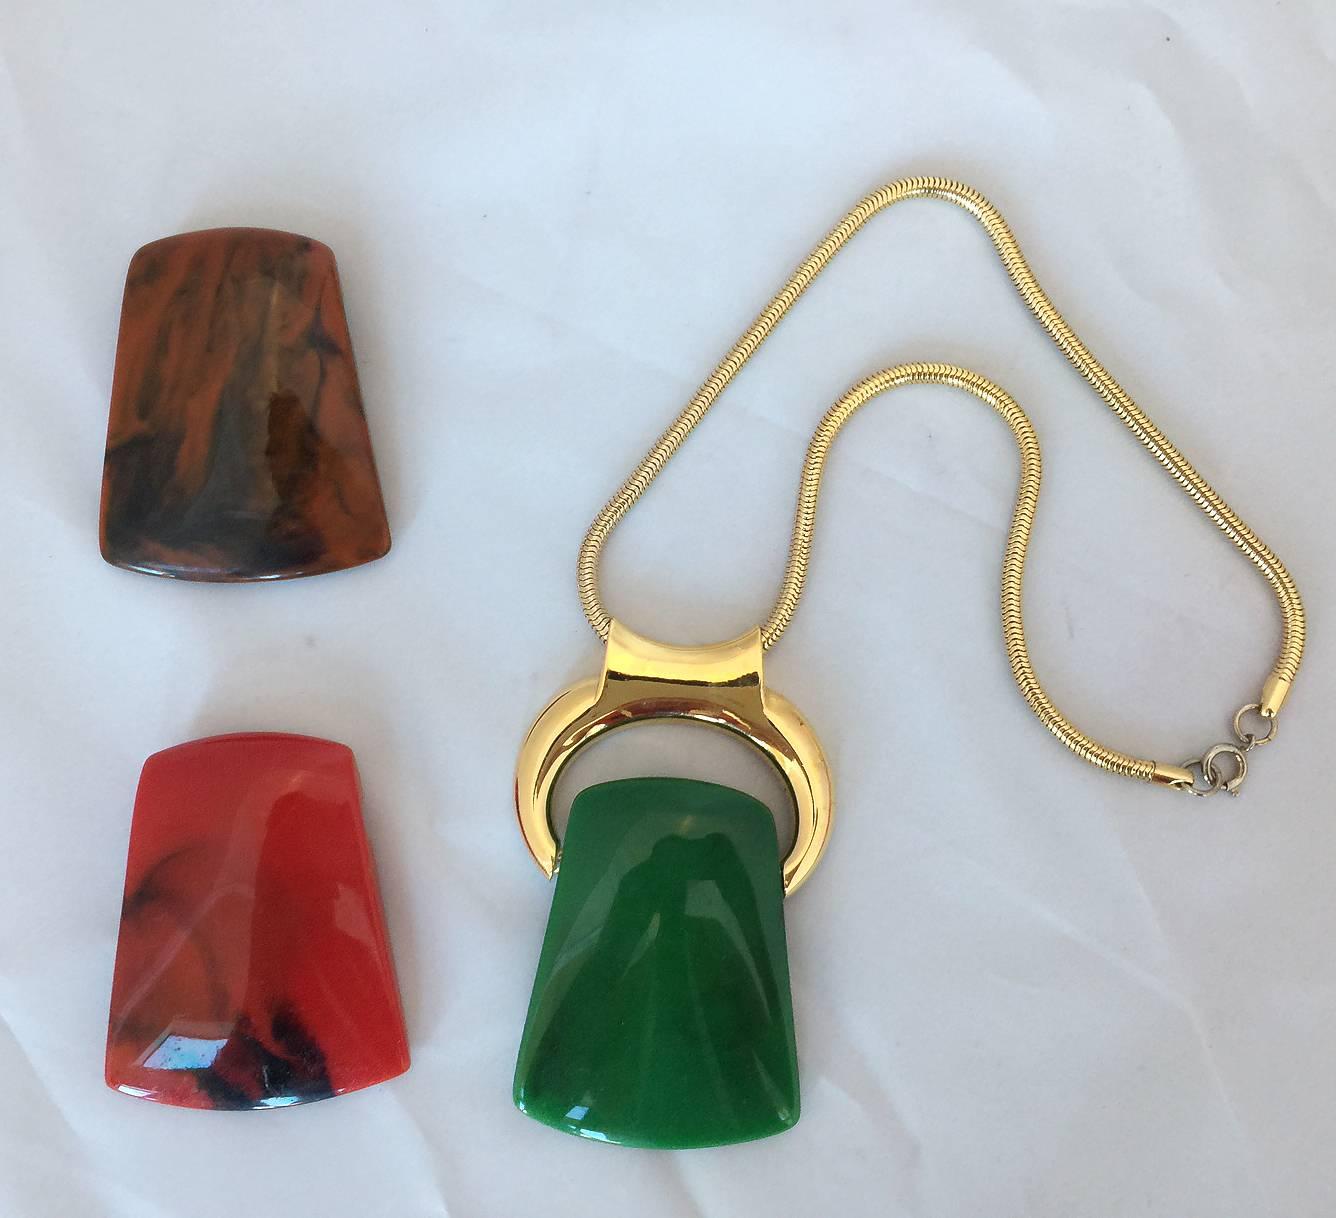 Bijoux Lanvin interchangeable pendant necklace with 3 different color marbled lucite (Green, Brown and Red) pendants in orginal box.

Signed 